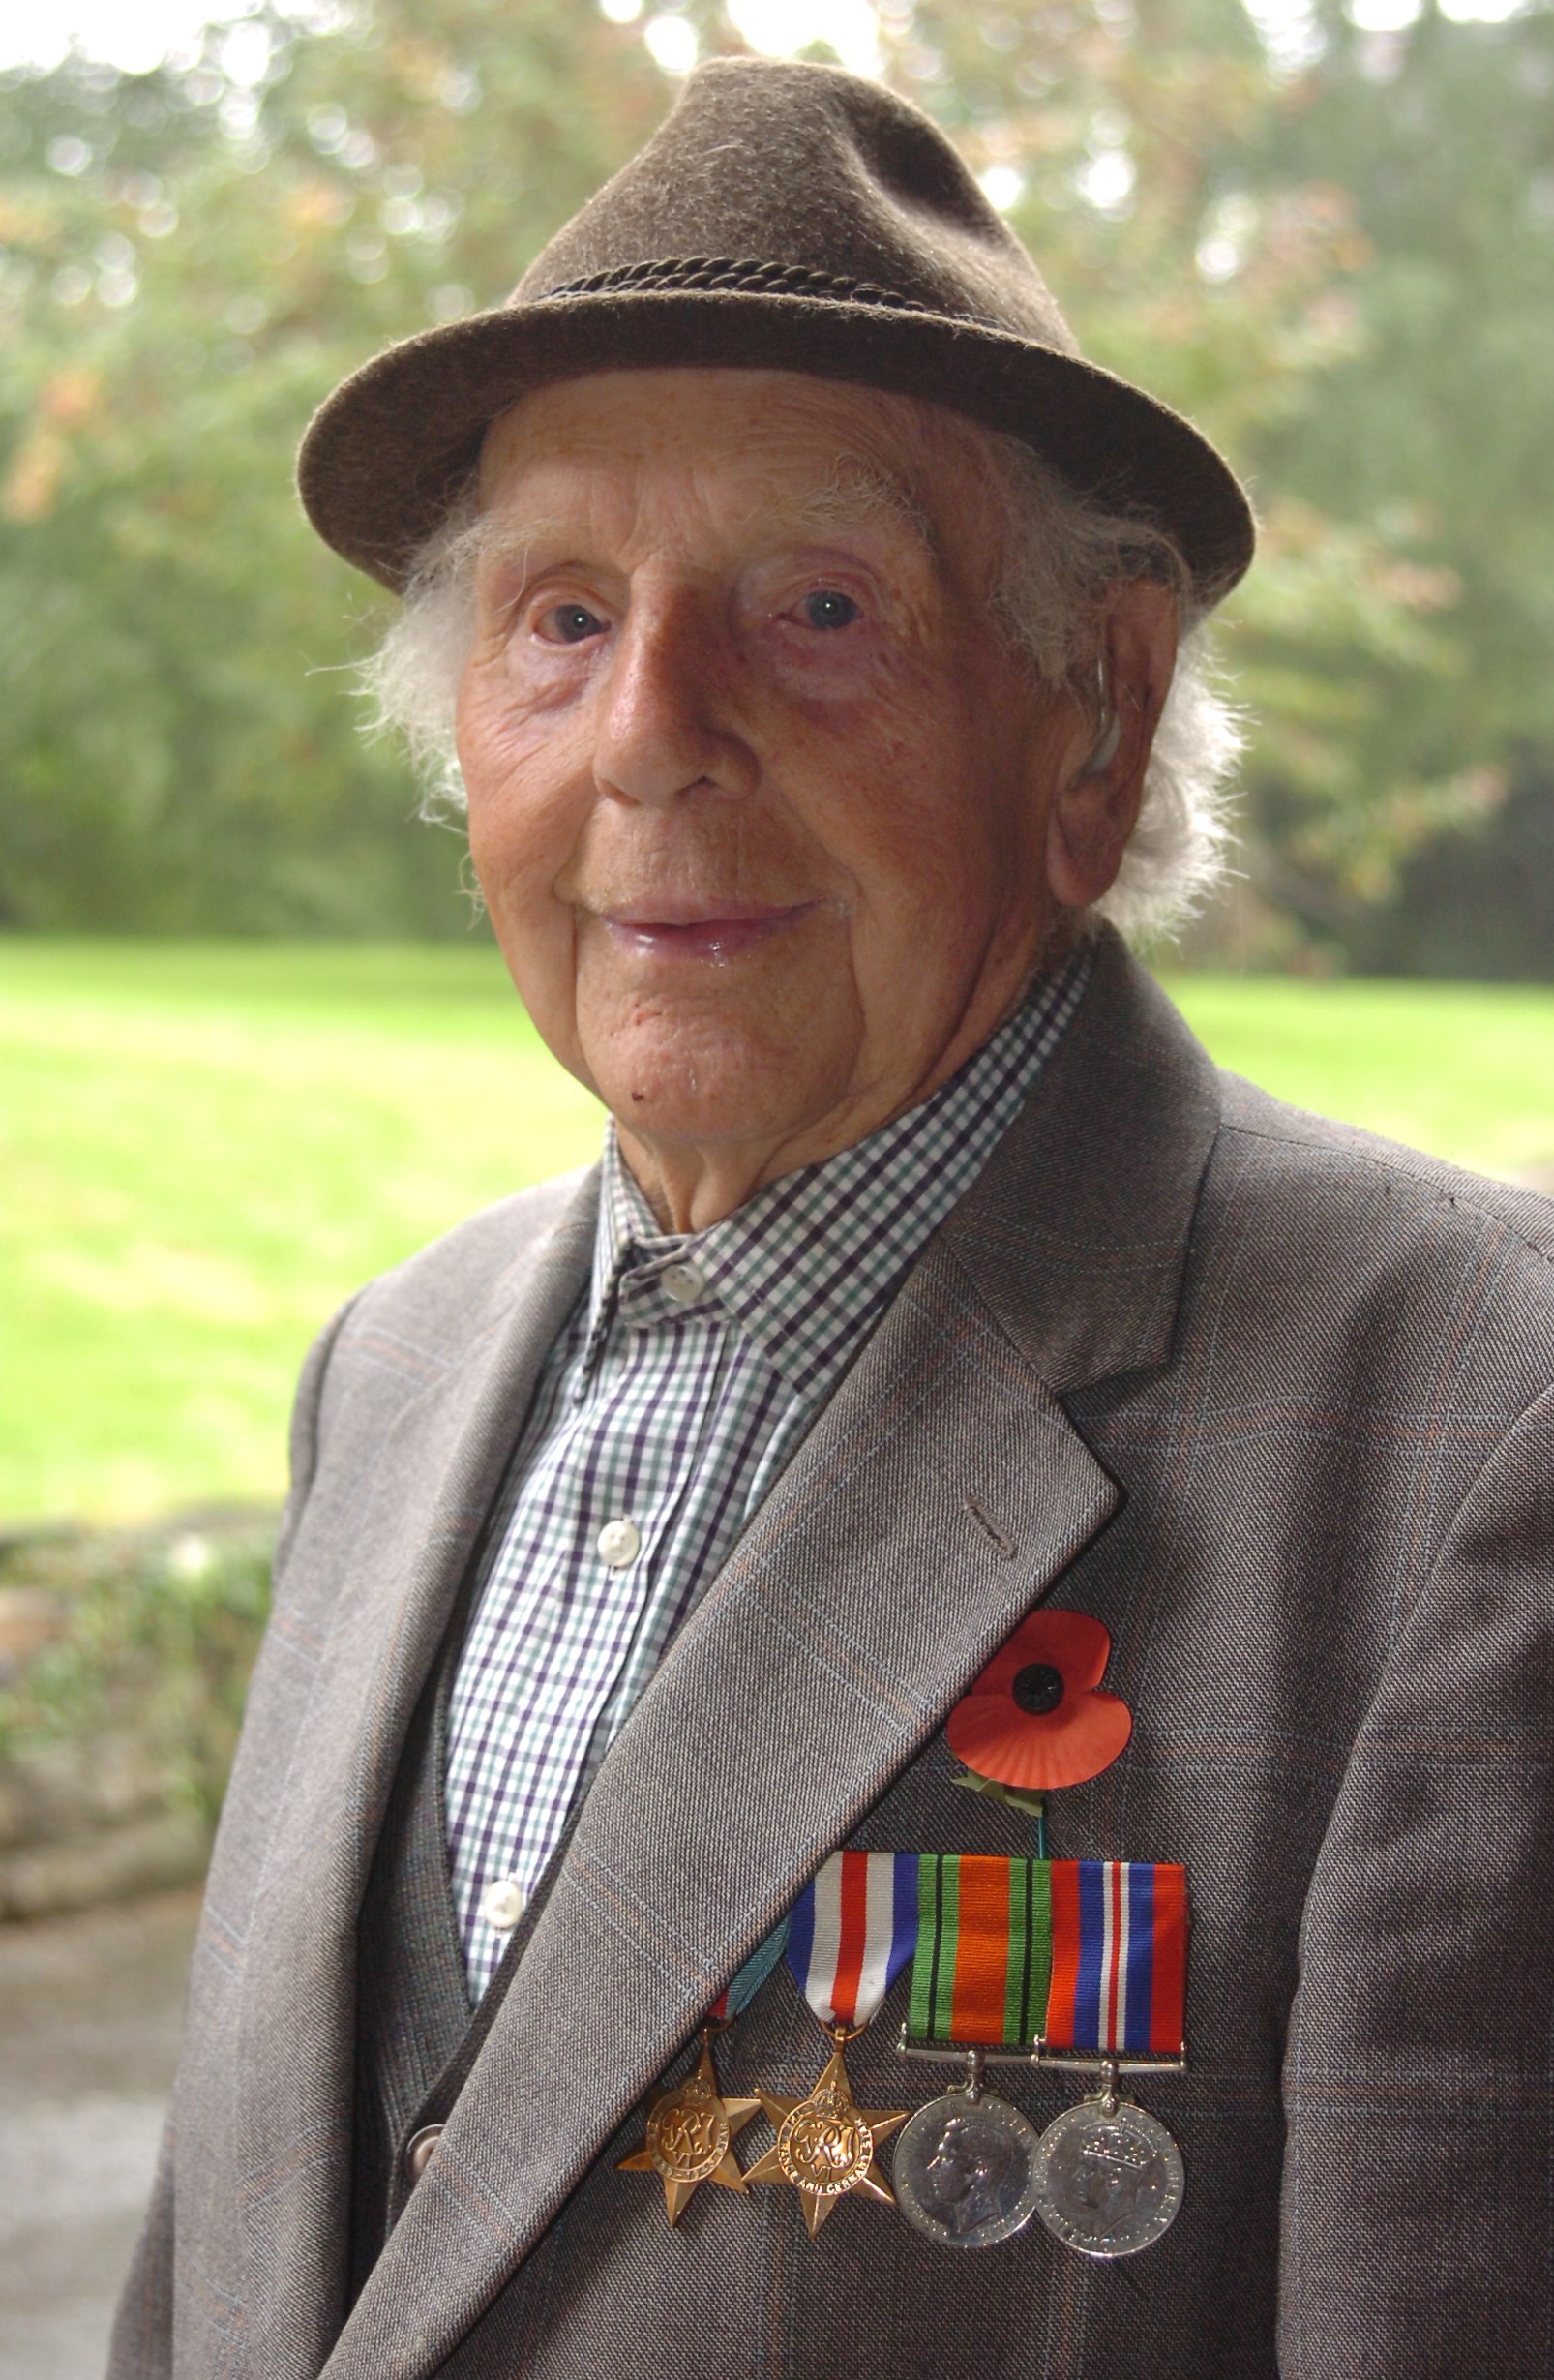 Second World War veteran <b>Alec Haines</b> whose father fought in World War One. - 3189569